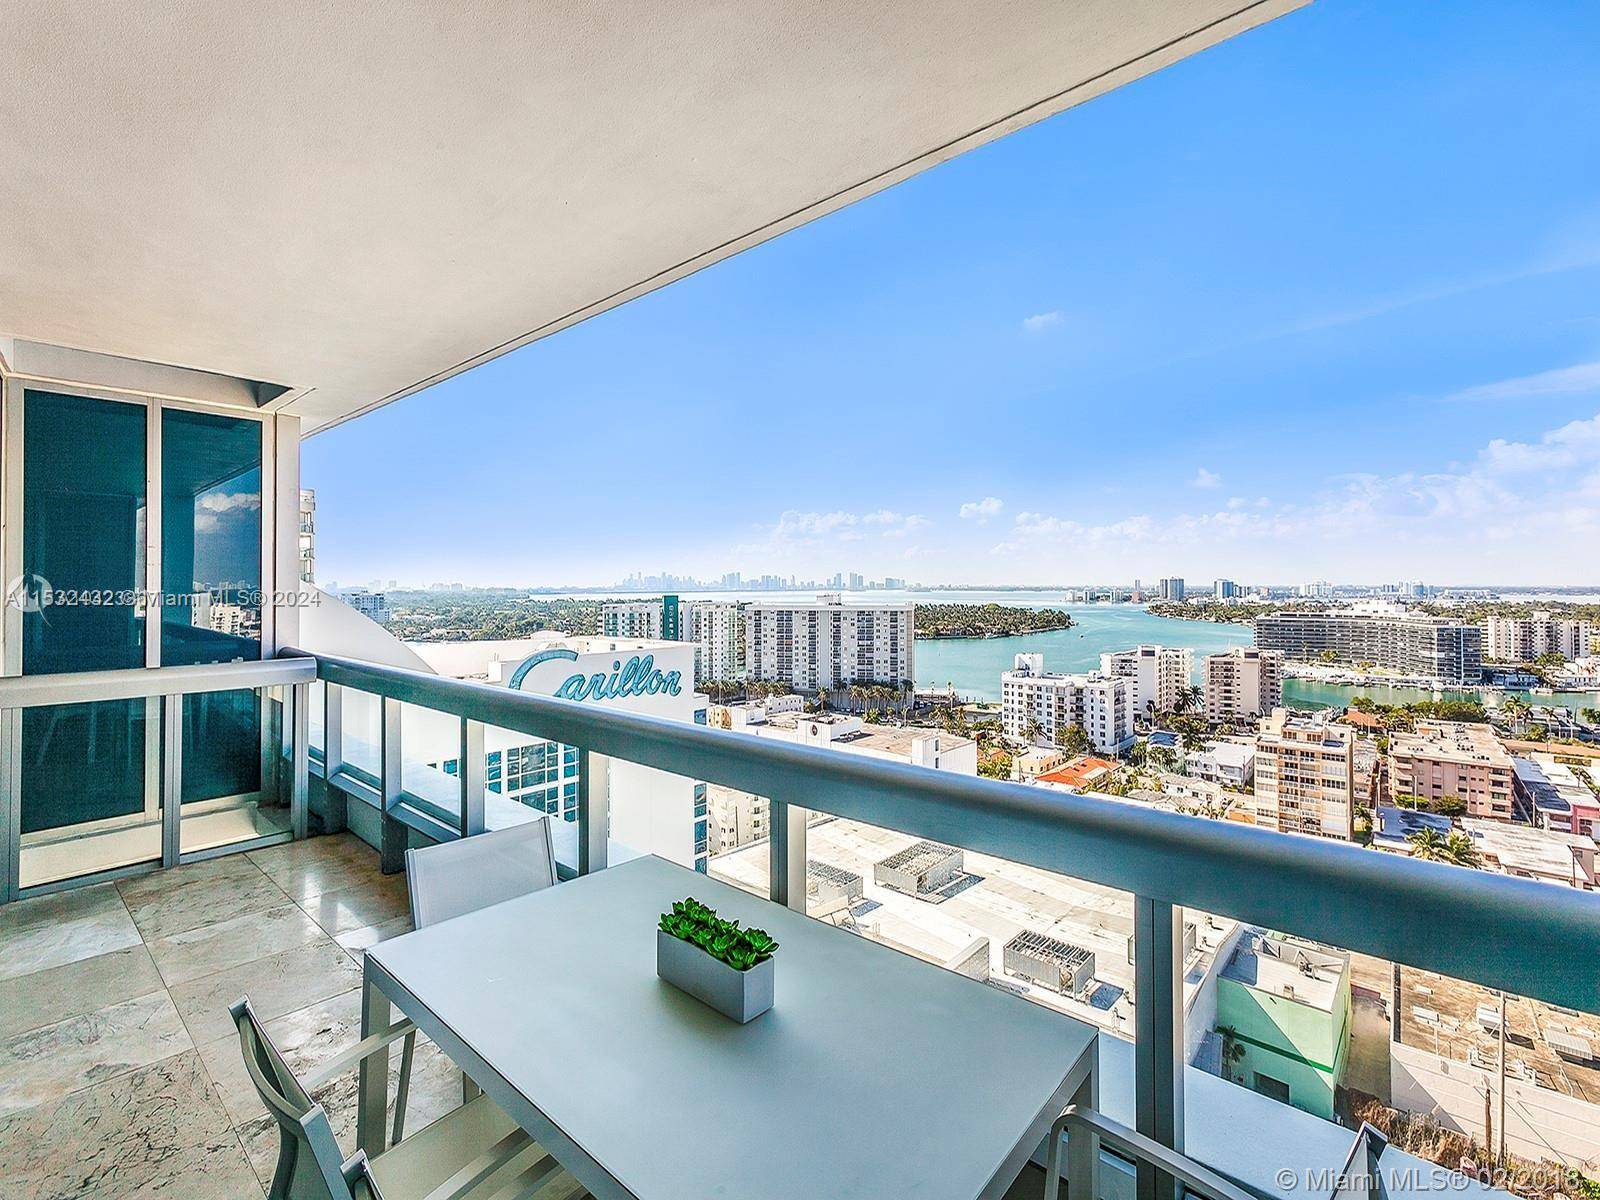 Stunning west facing views from high floor furnished turnkey unit in prestigious North Tower of Carillon Miami Wellness Resort, a premier oceanfront luxury property.